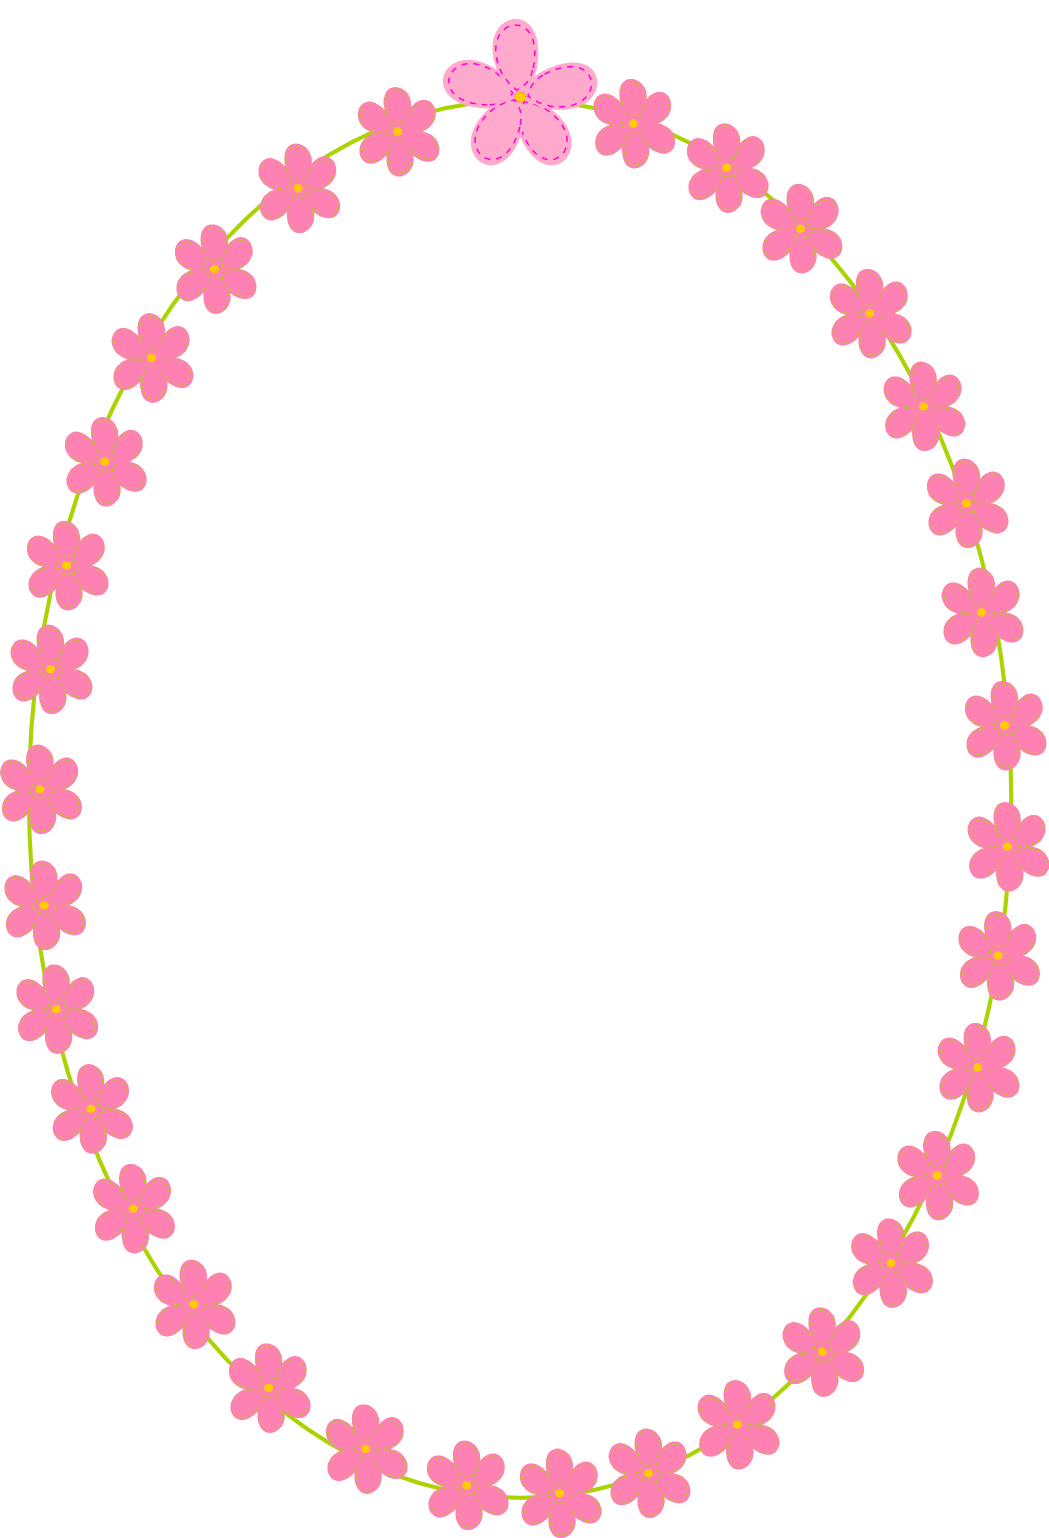 png clipart frame - photo #38